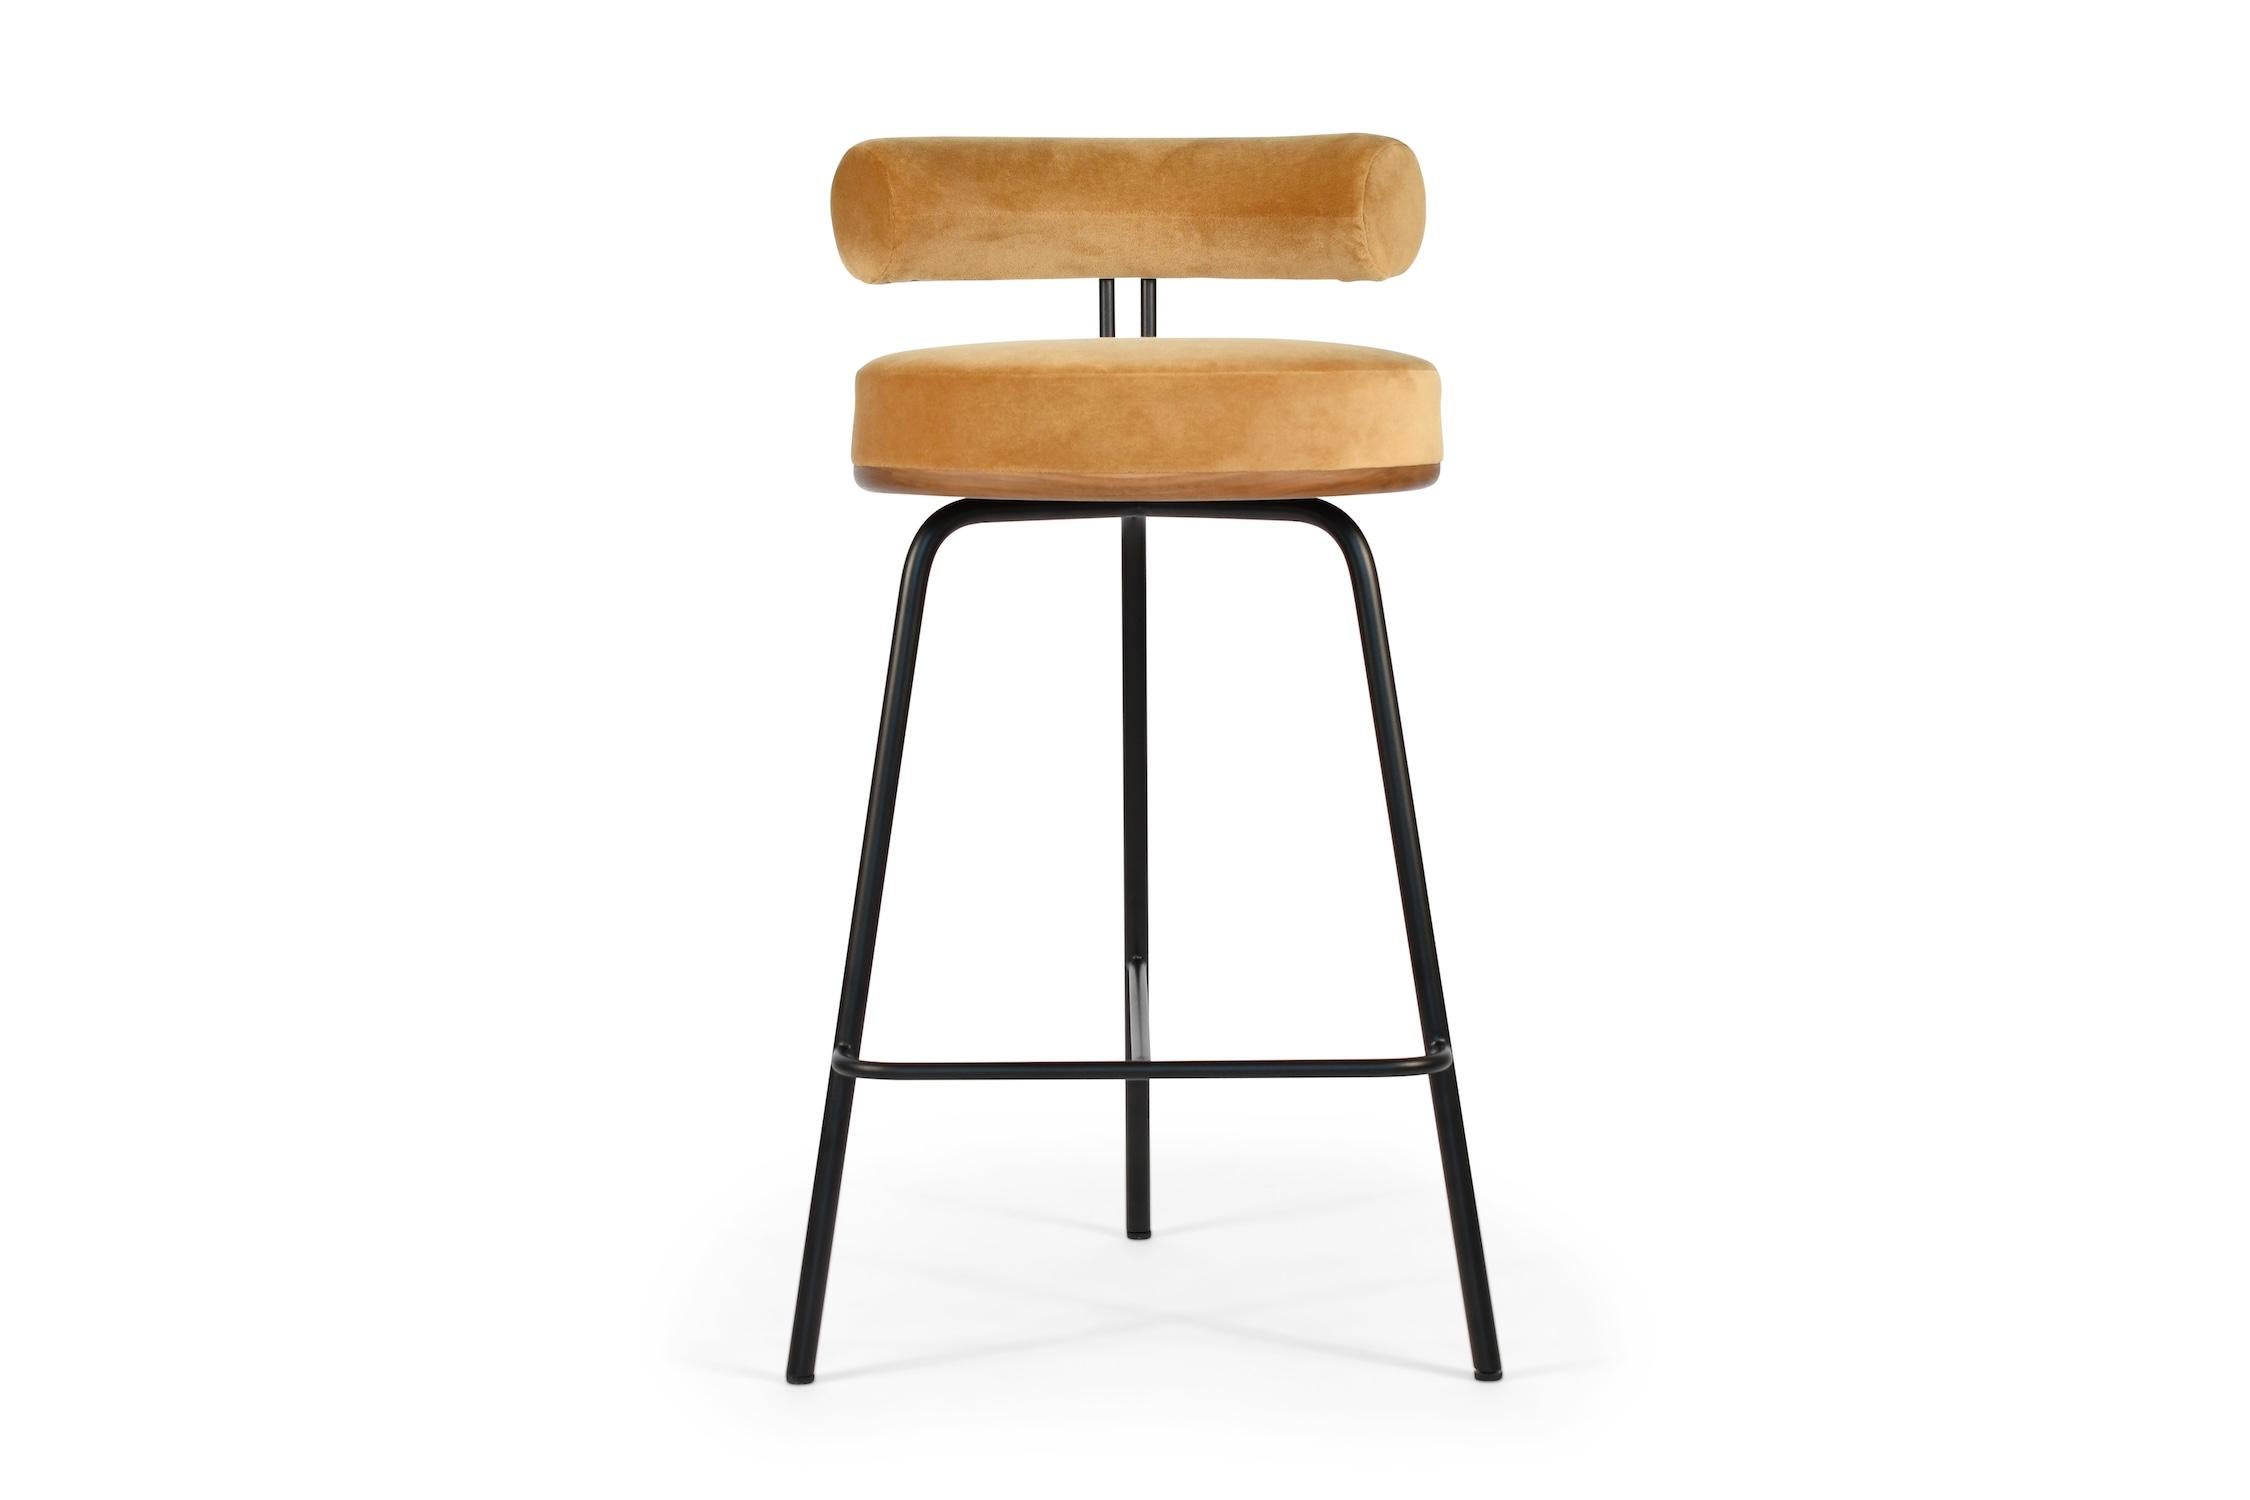 The Annie stool with its simple, modern form and refined tailoring details provides the right balance between utility and sophistication. Carefully considered for ergonomics, beauty, and performance. The upholstered seat and flowing curved back lend